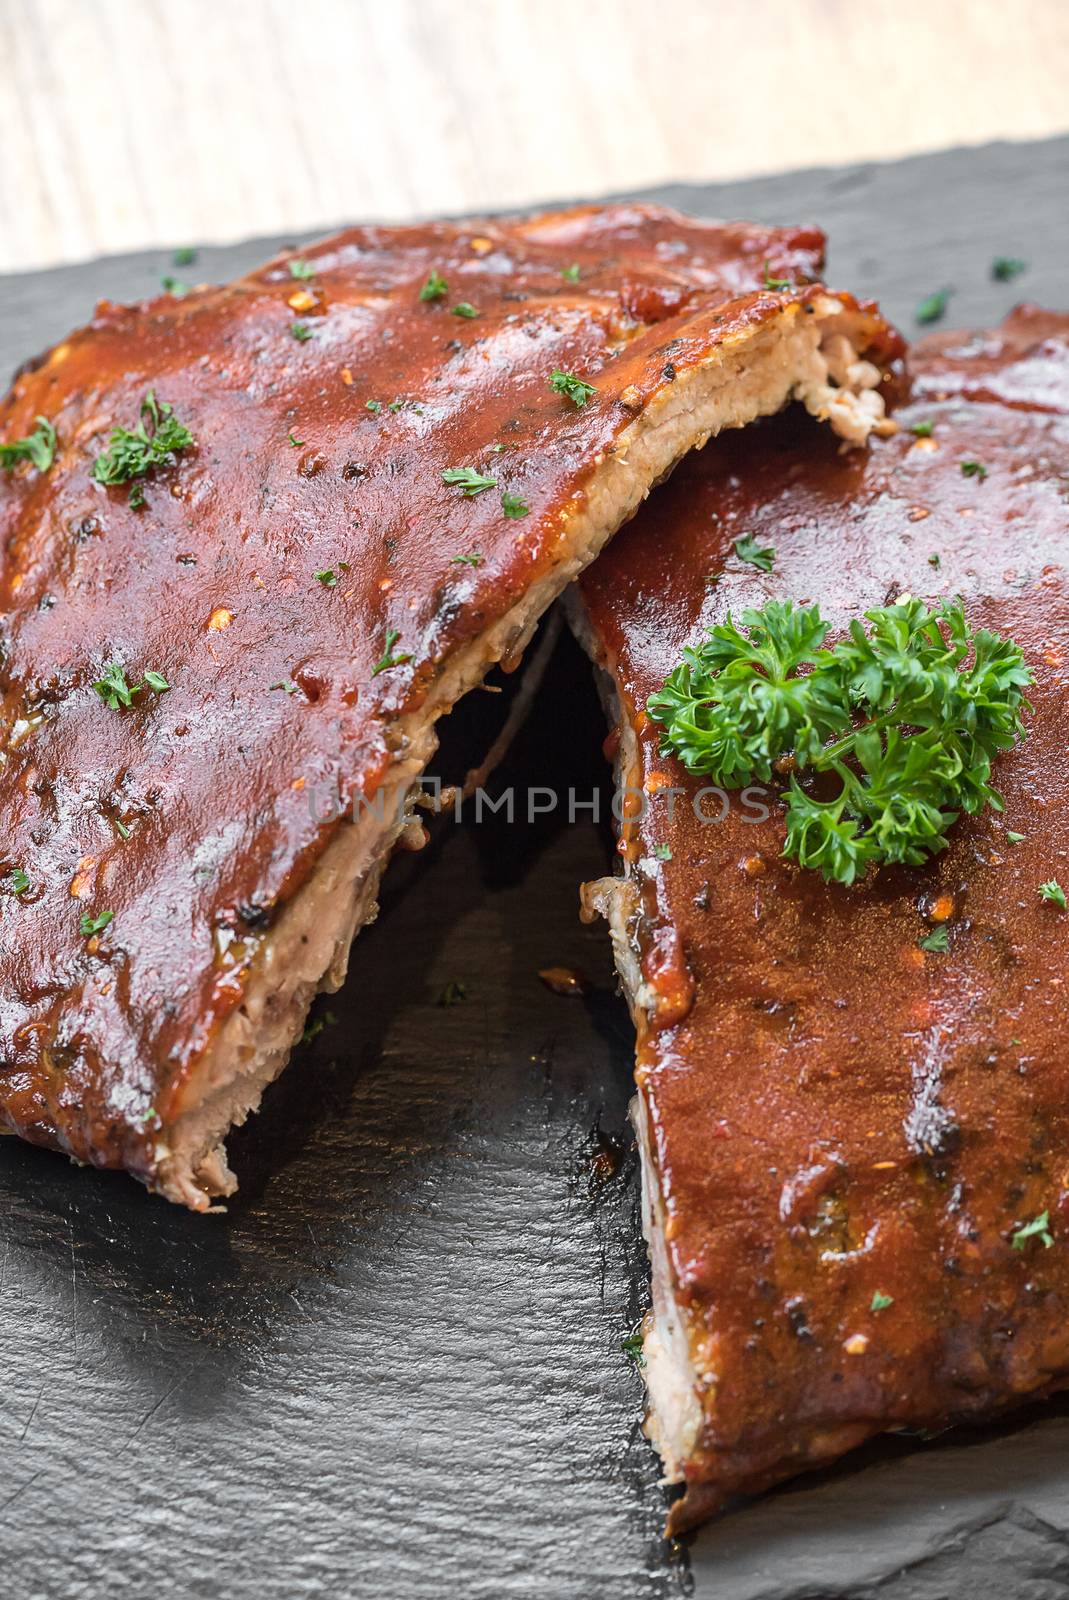 Grilled Pork Ribs by vichie81